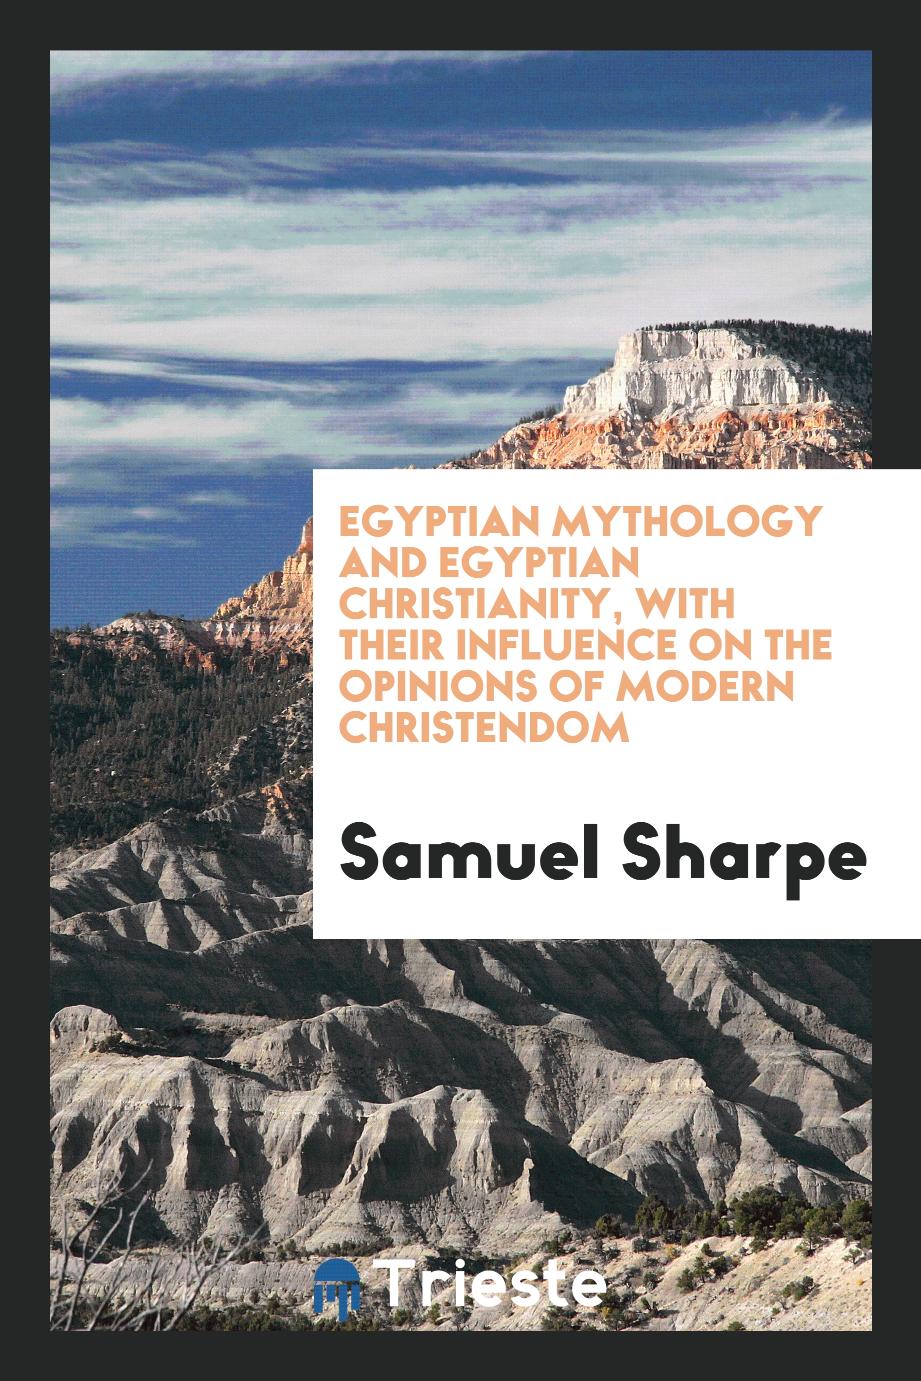 Egyptian mythology and Egyptian Christianity, with their influence on the opinions of modern Christendom